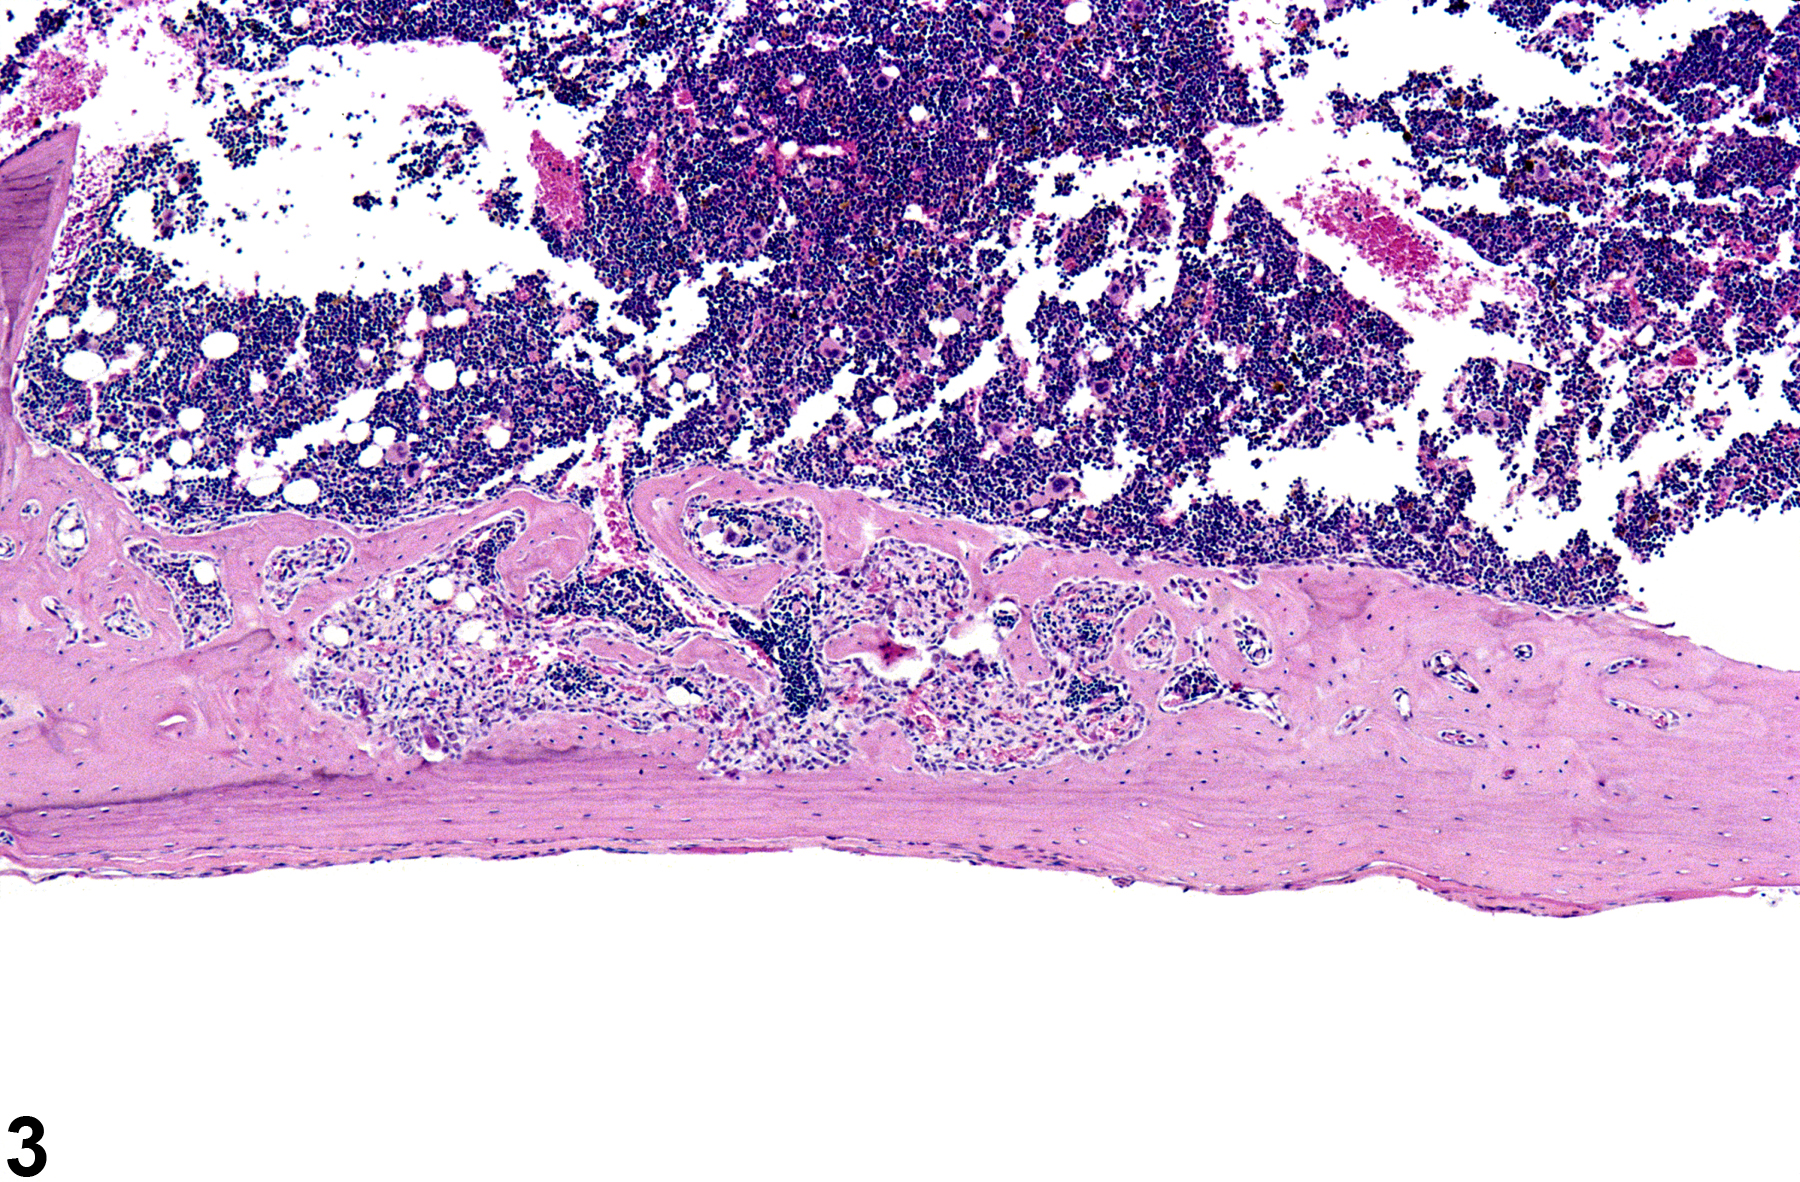 Image of fibro-osseous lesion in the bone from a female B6C3F1/N mouse in a chronic study